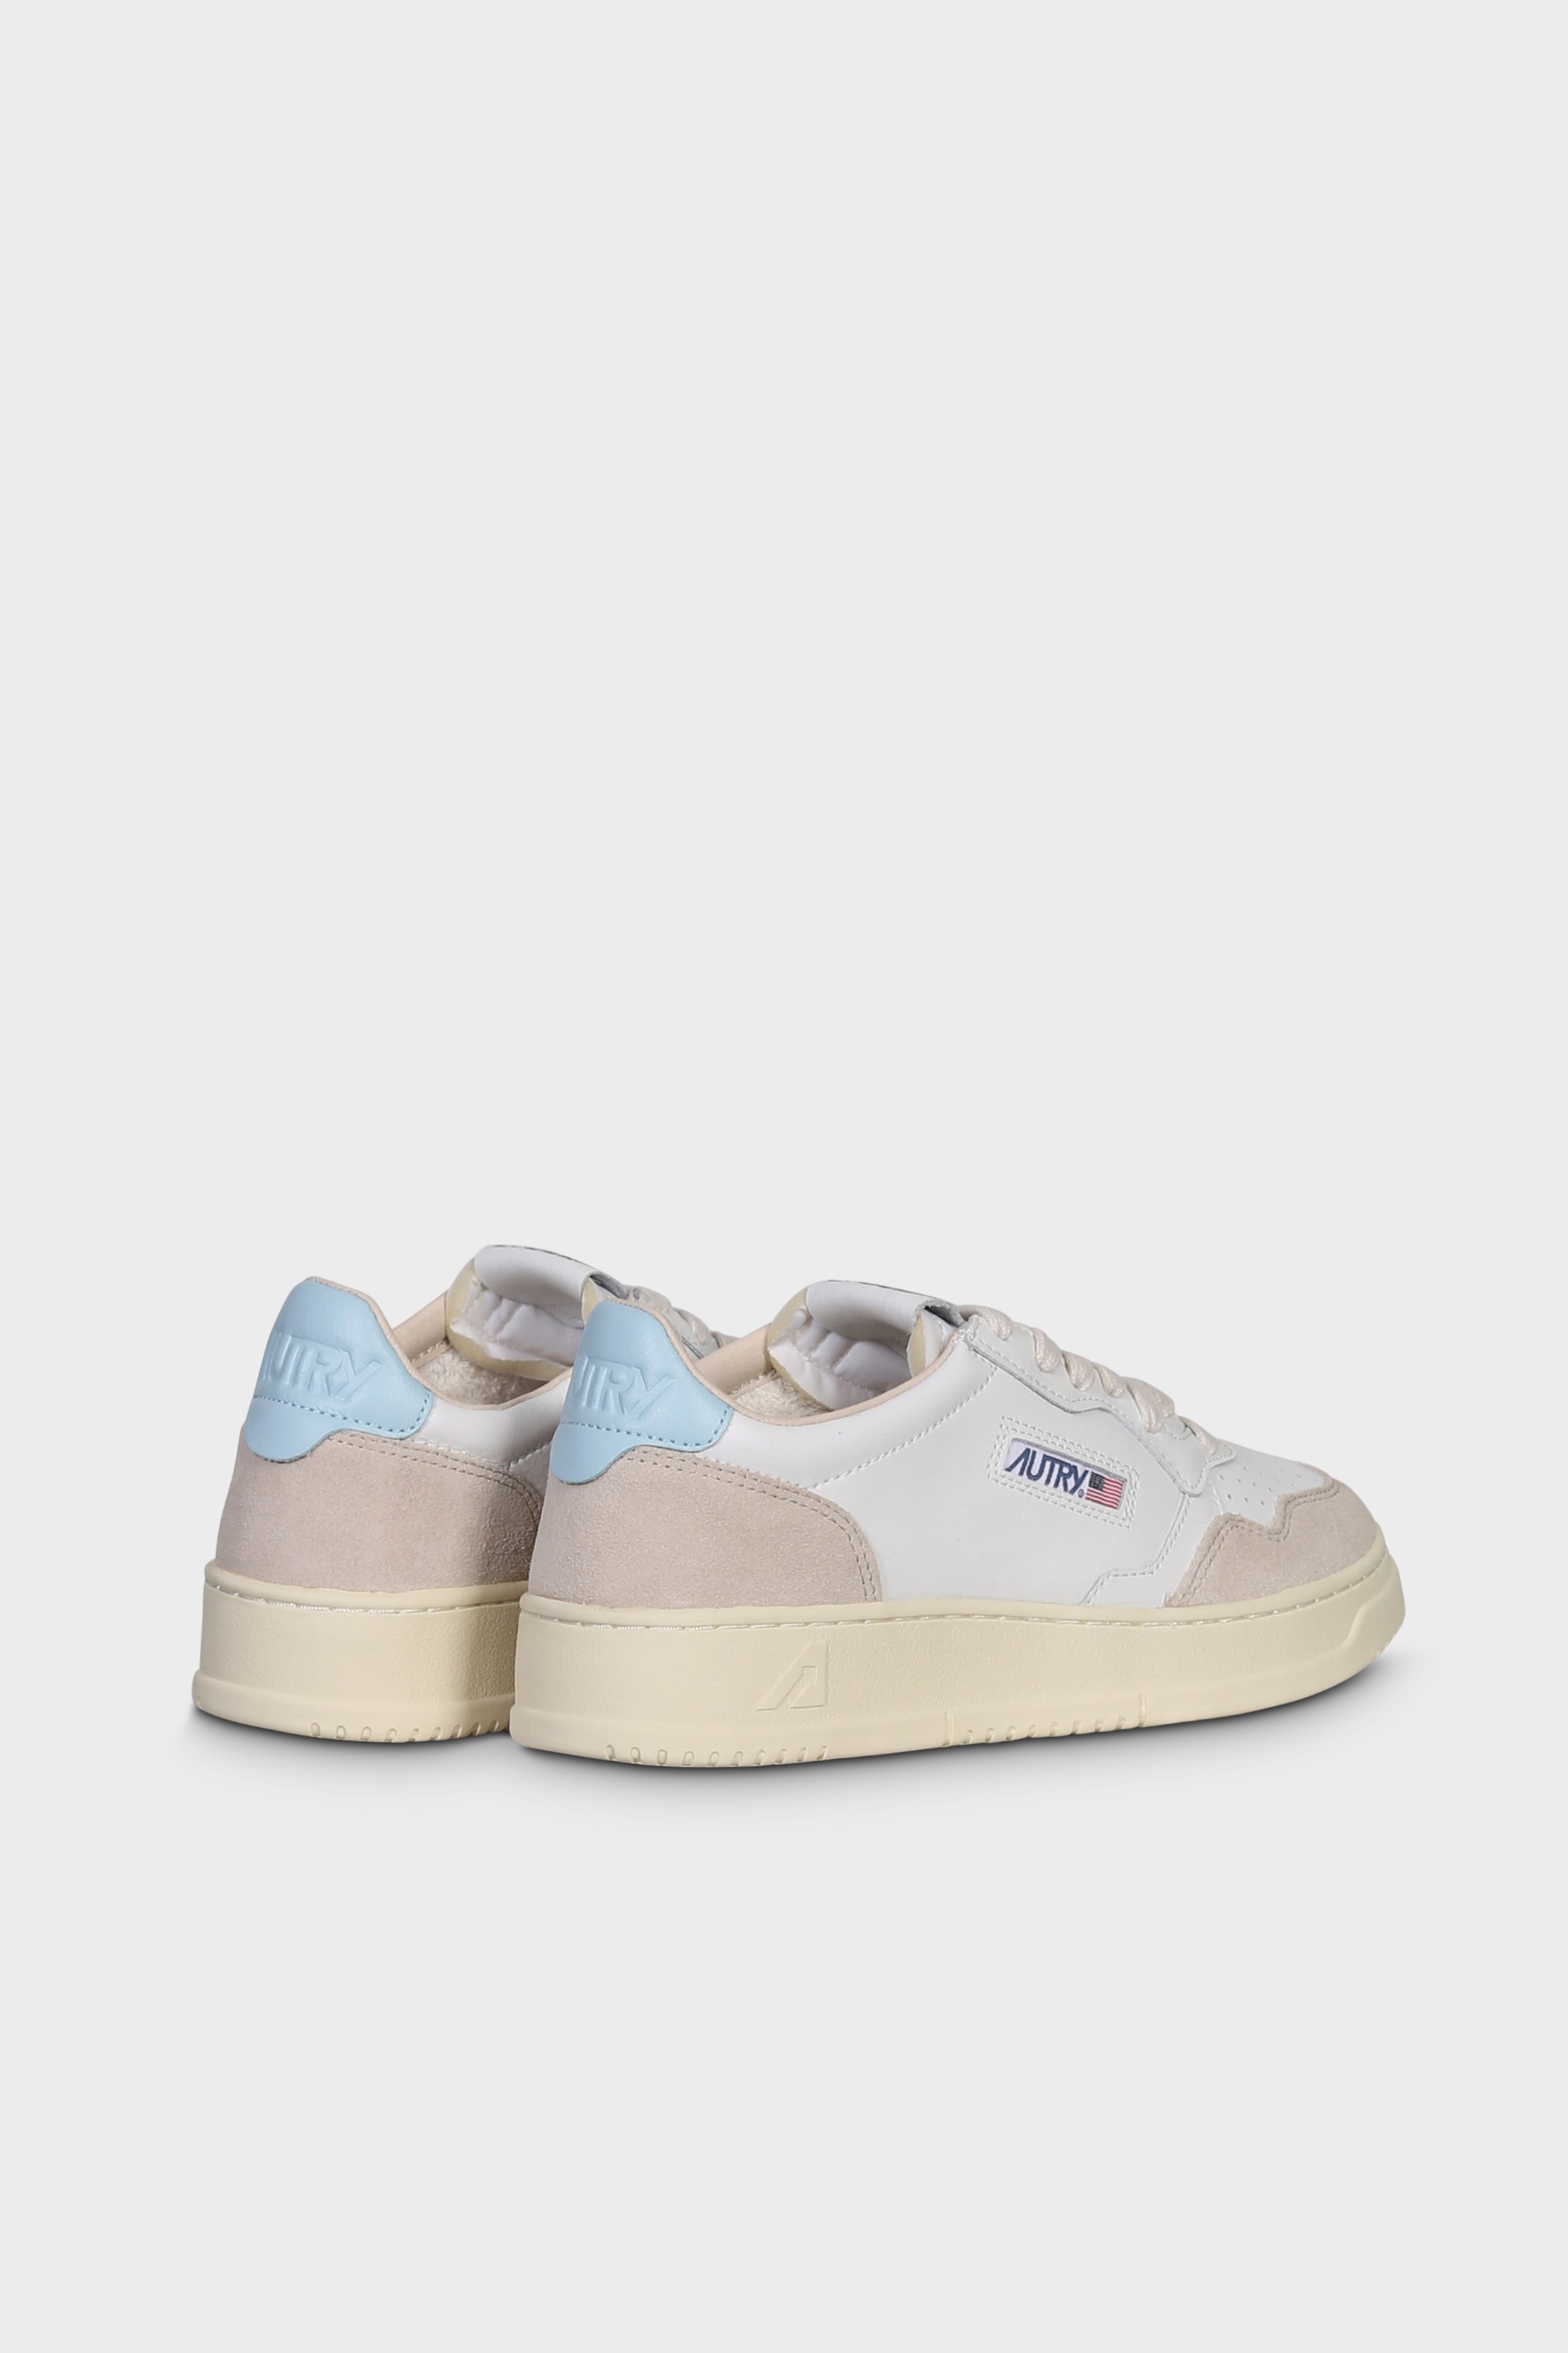 AUTRY ACTION SHOES Medalist Low Sneaker Suede White/Stream Blue 42